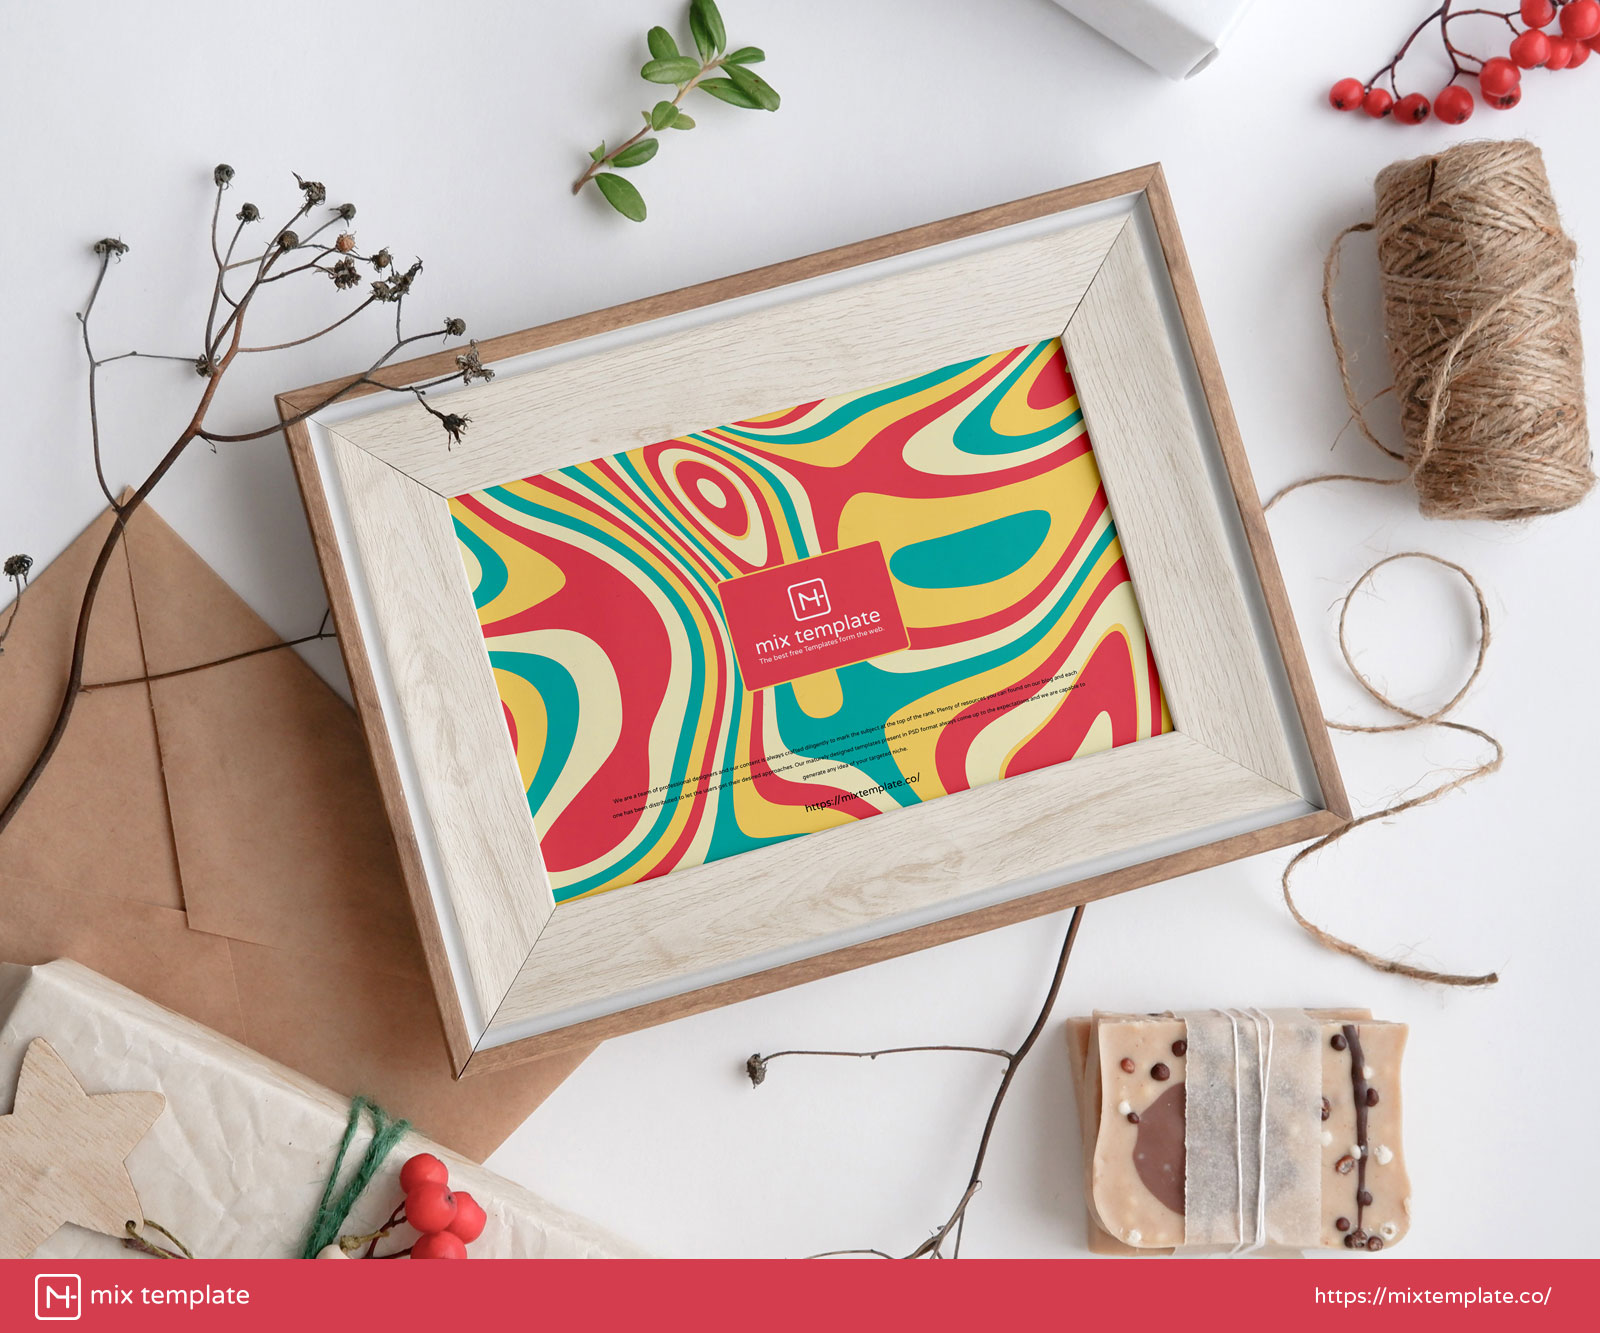 Free-Artistic-Wooden-Frame-Mockup-Template